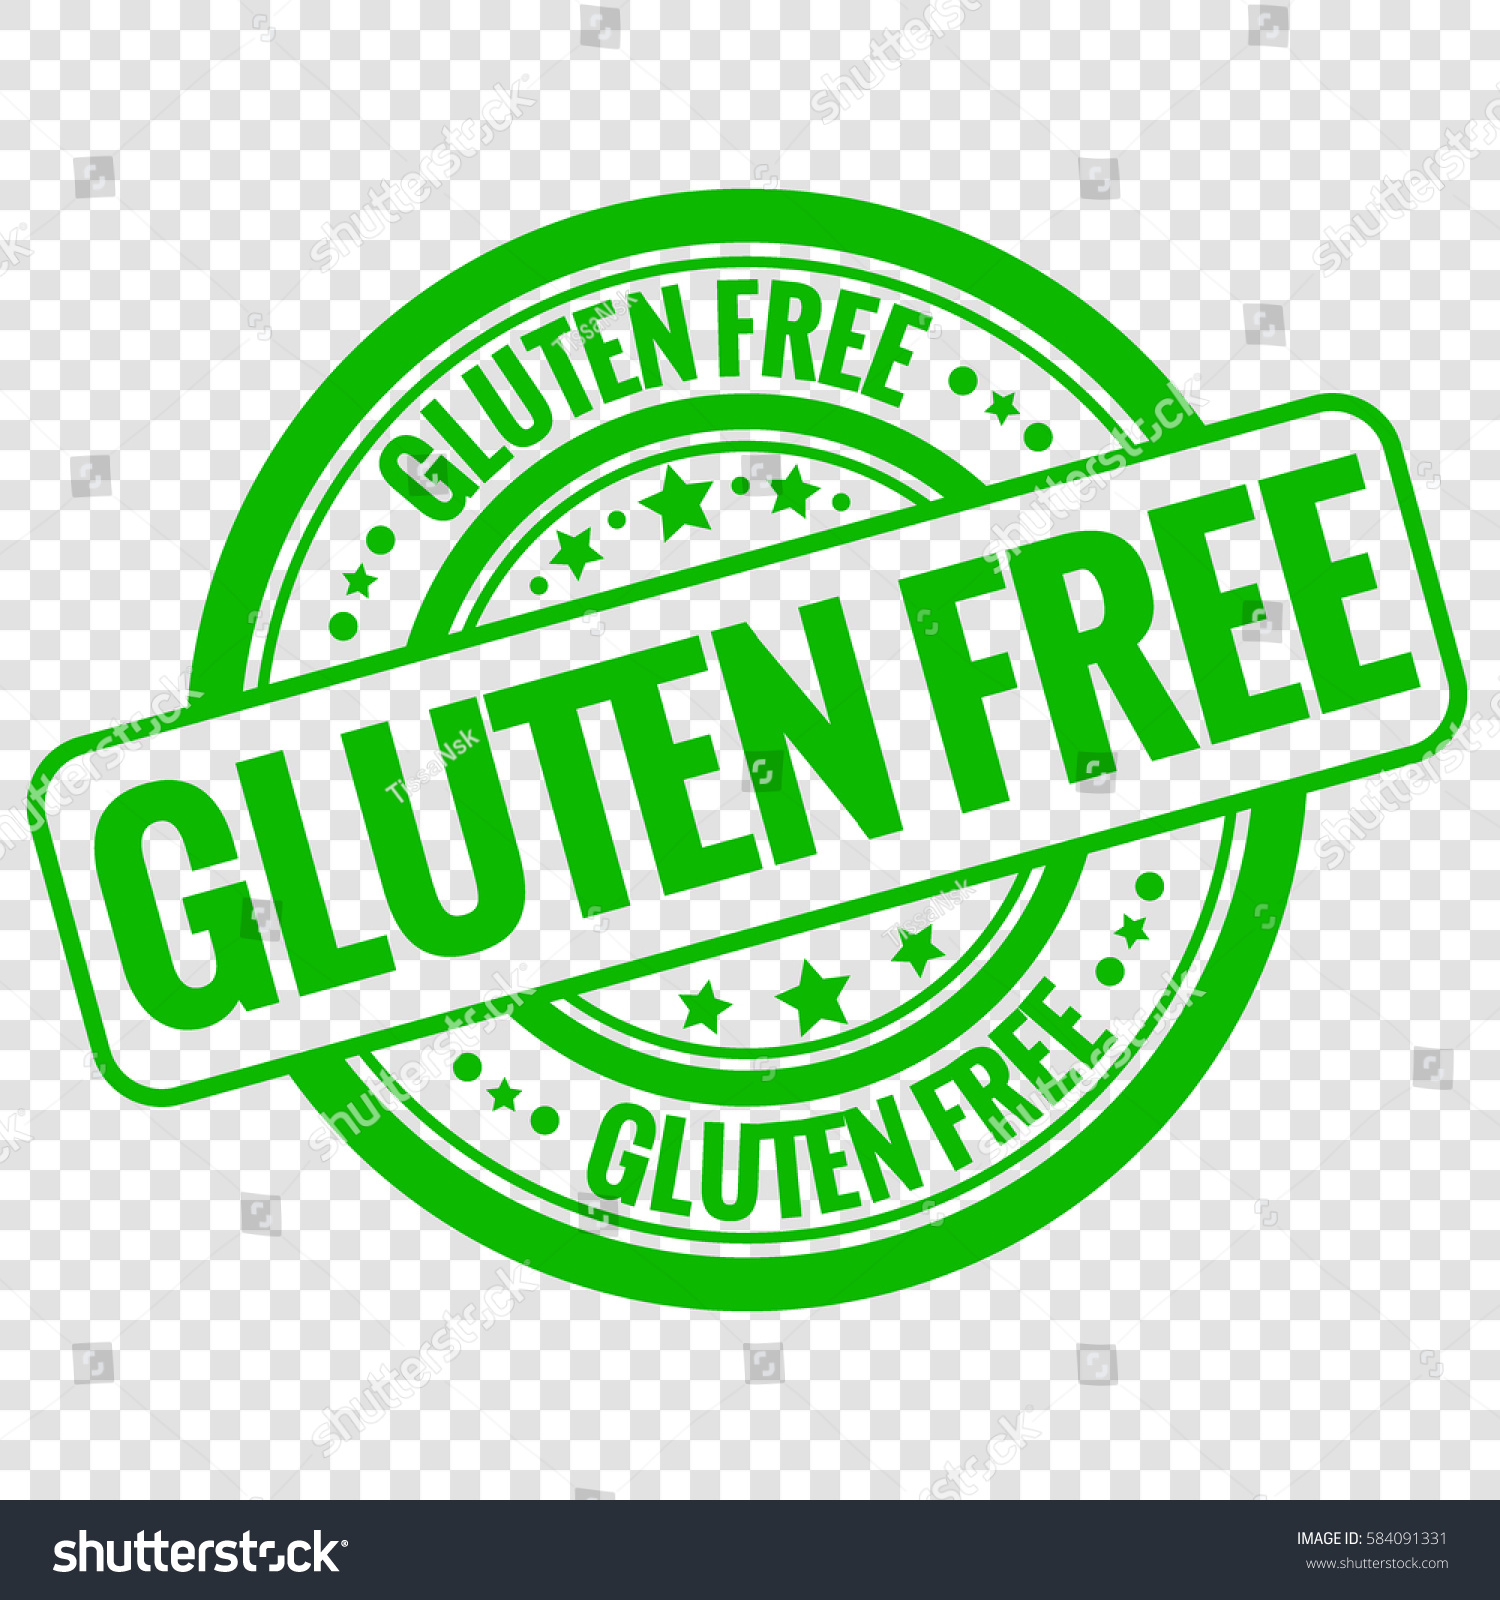 Download Vector Gluten Free Stamp Isolated On Stock Vector 584091331 - Shutterstock